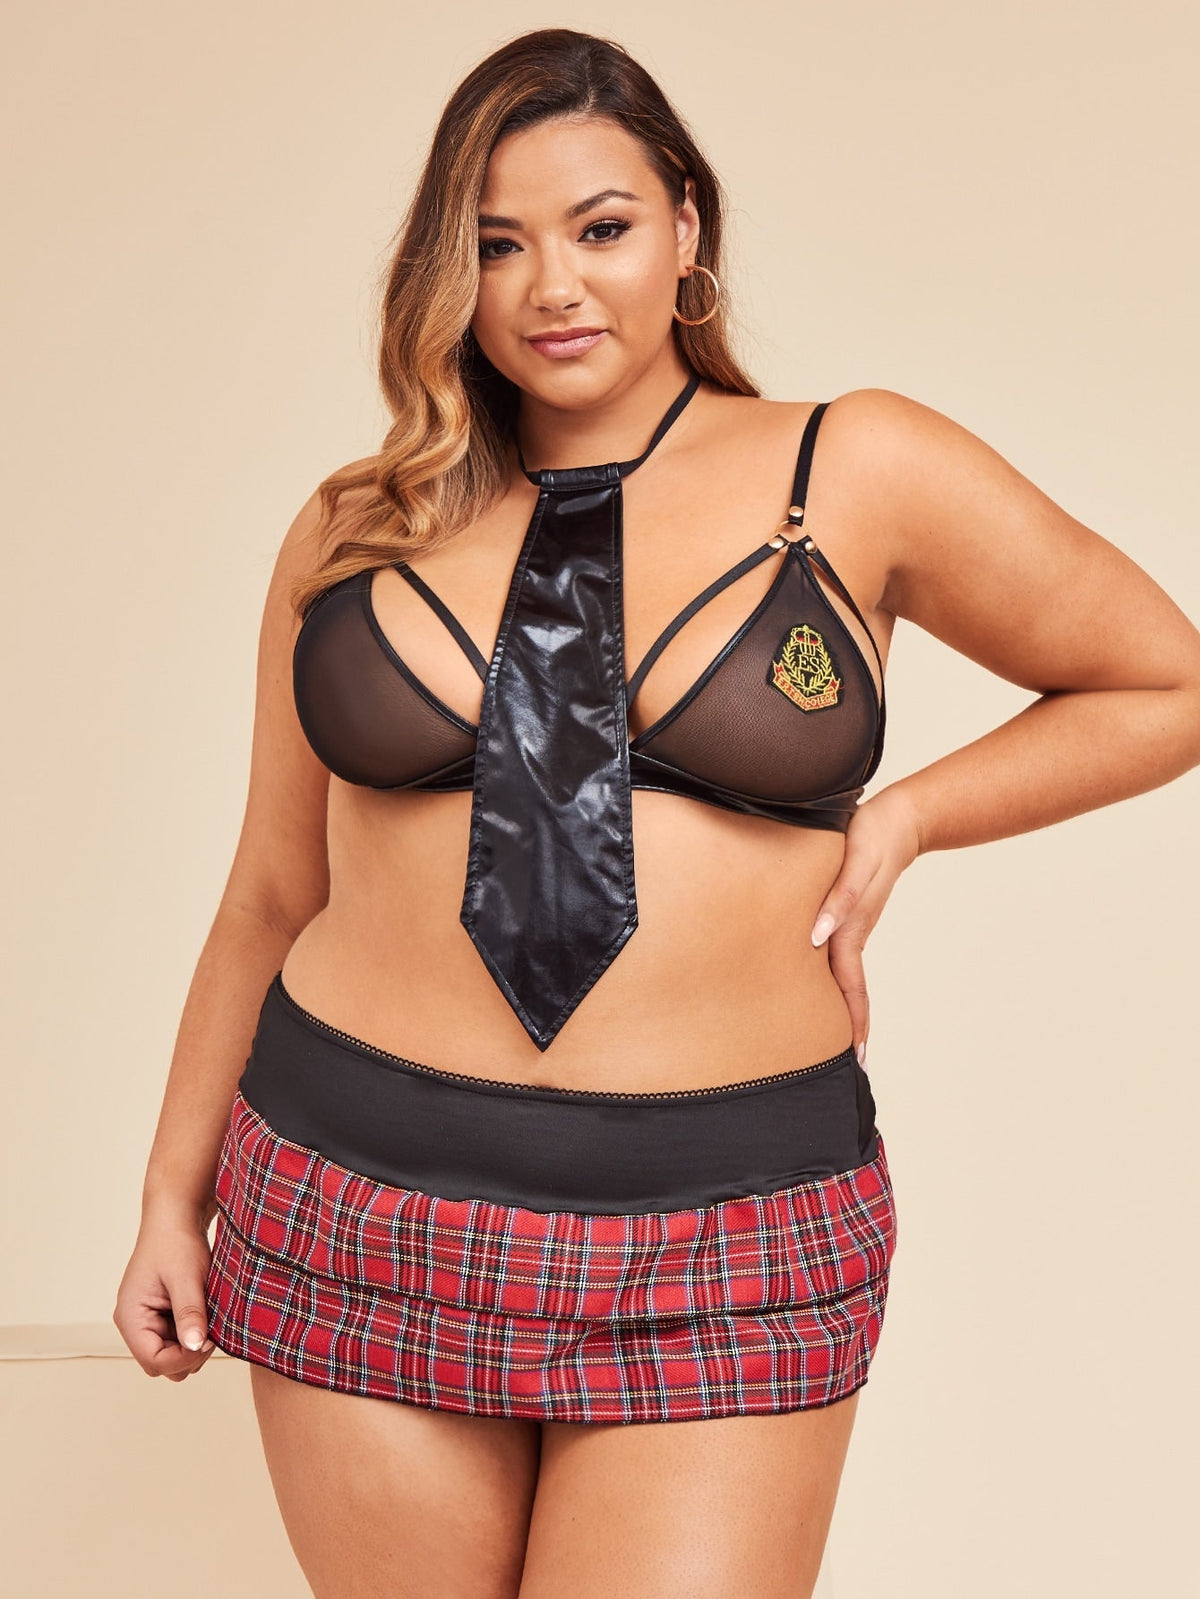 Plus Size Cop Costume Set 3pack SEXY DRESS OUTLET